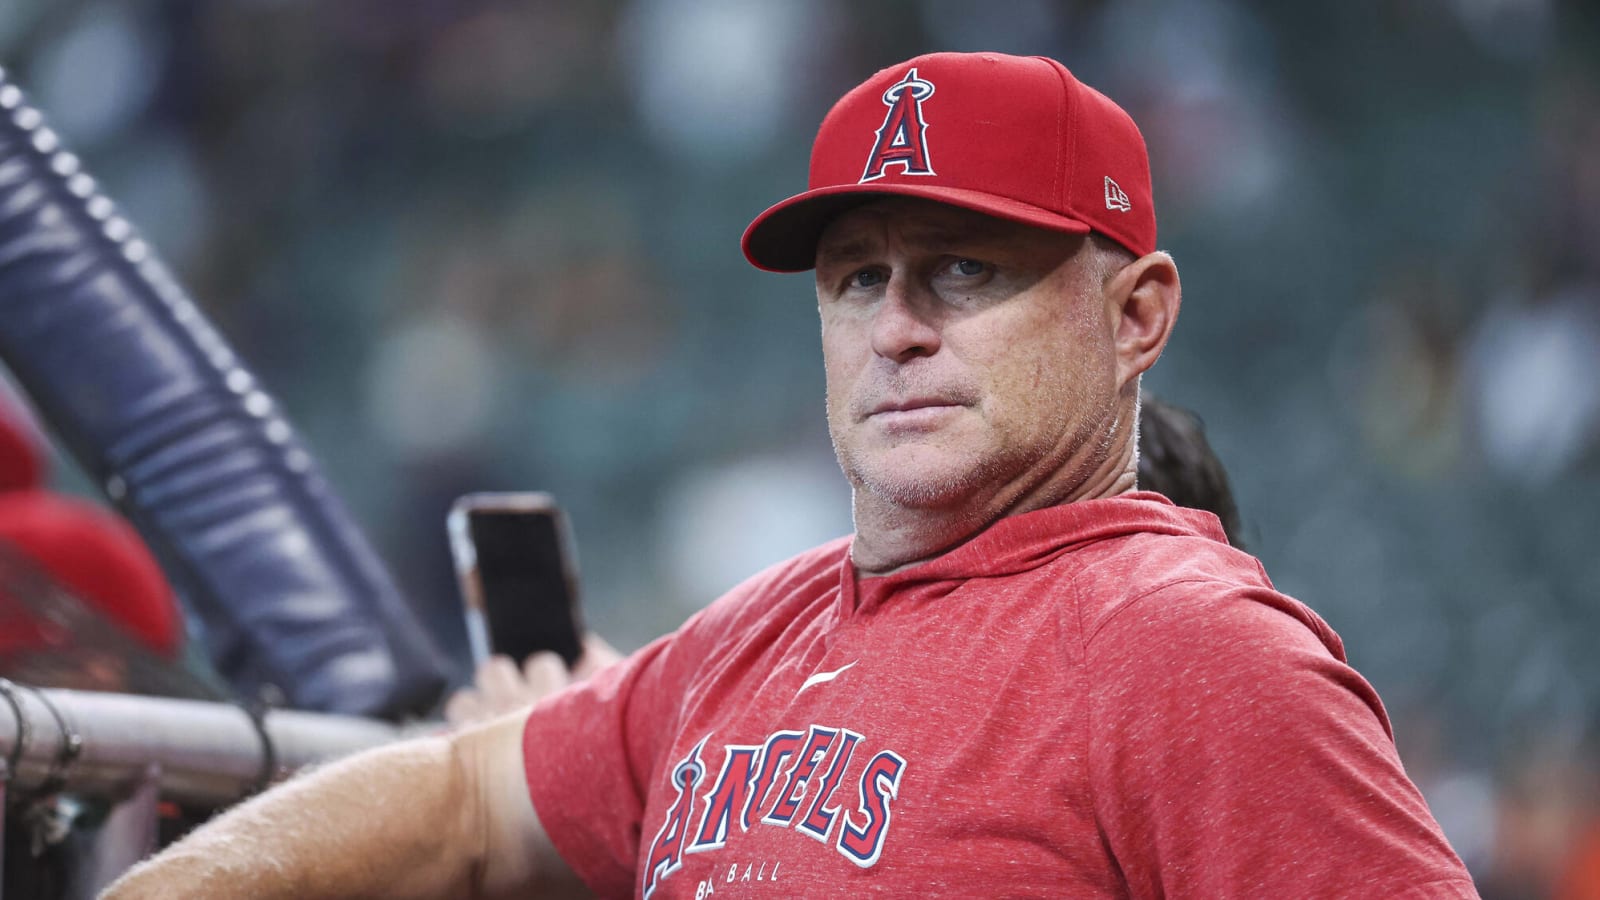 Angels manager brings the theatrics